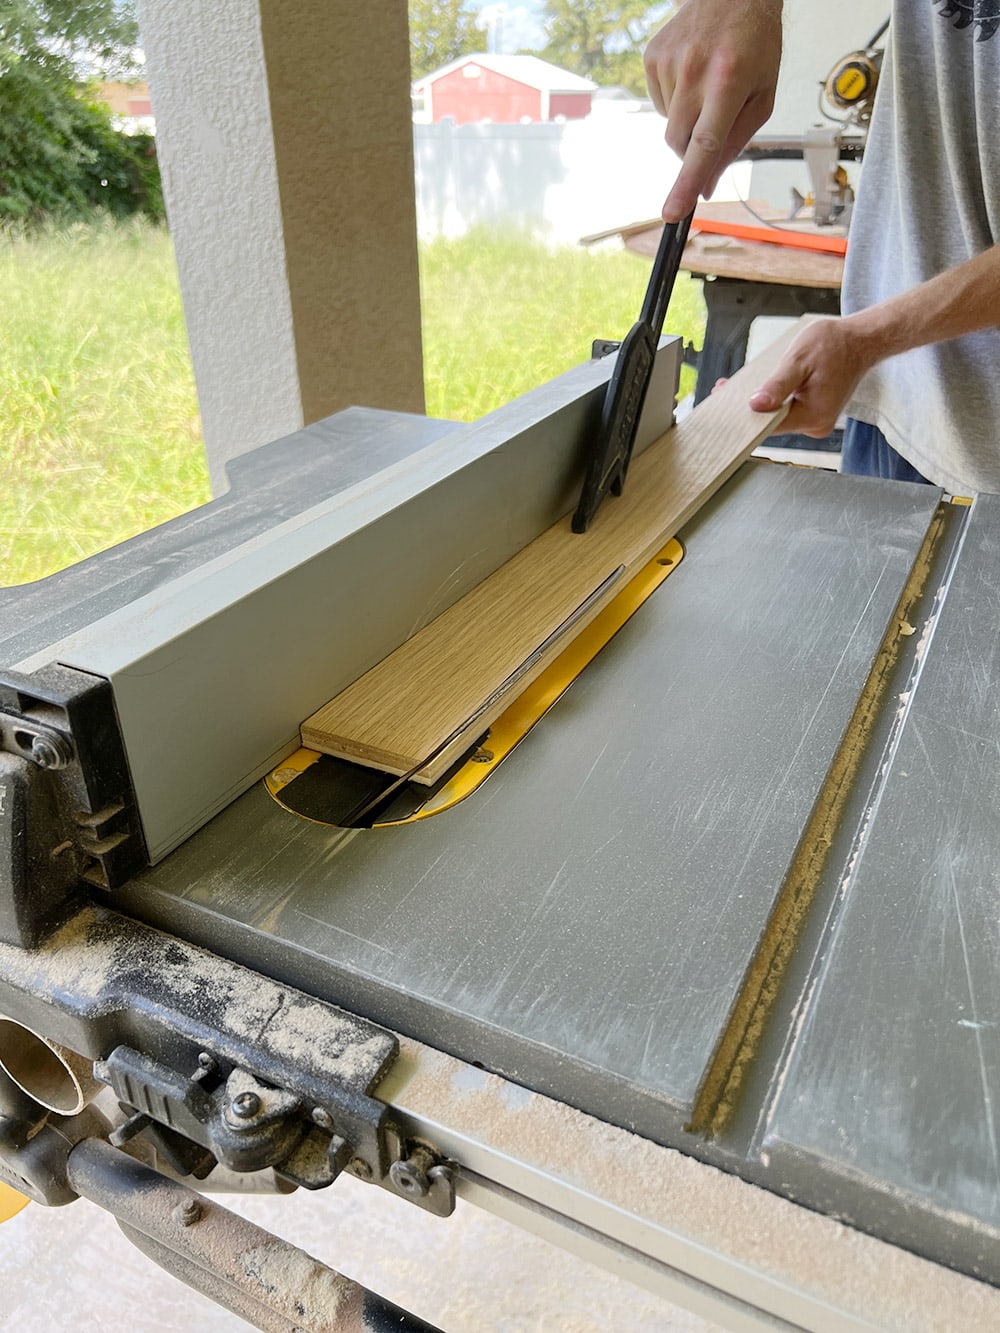 miter cut on a table saw